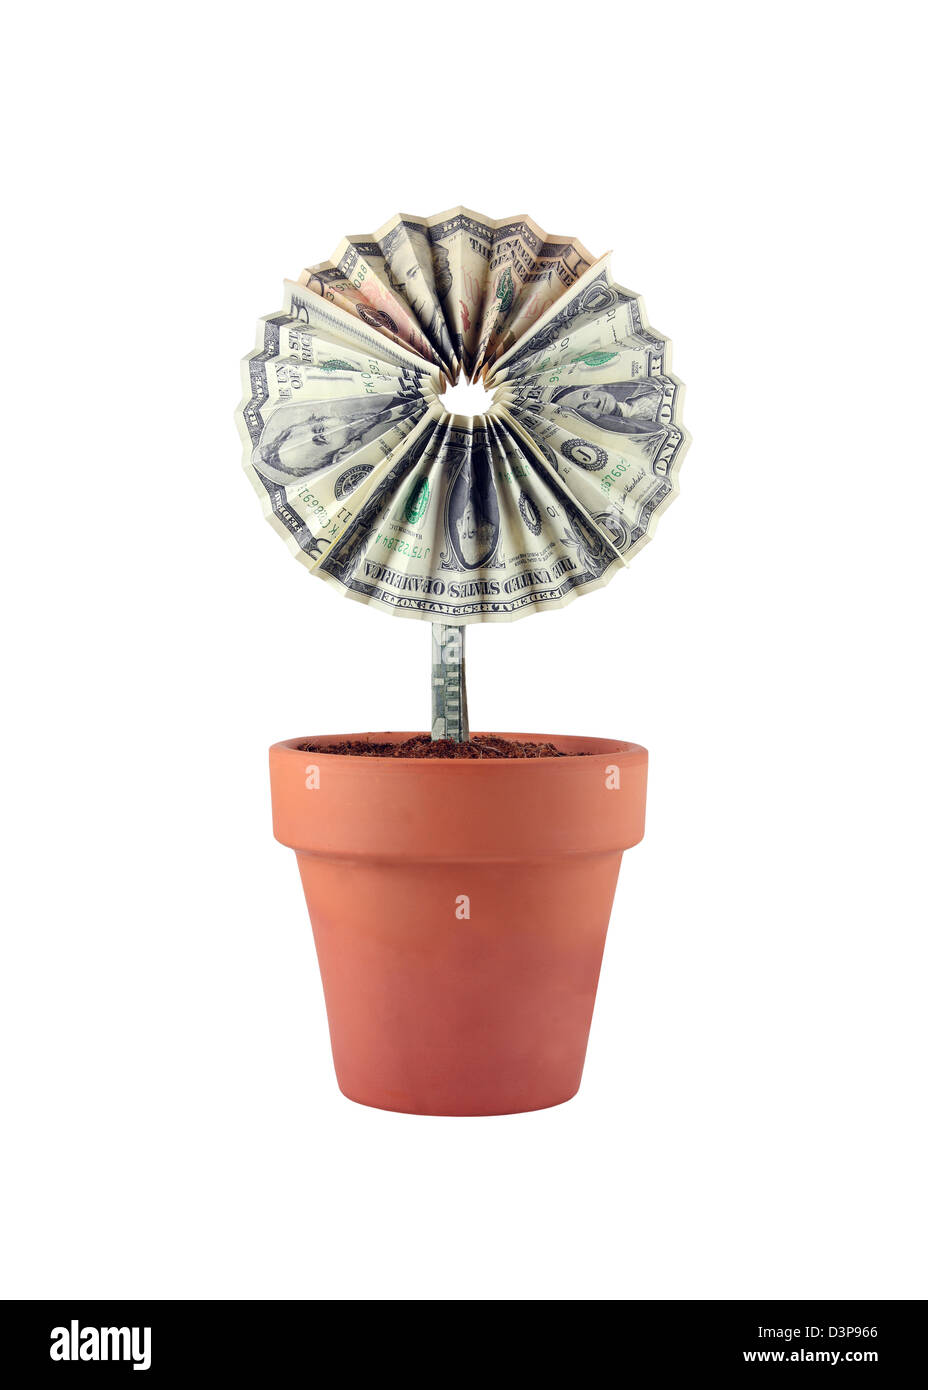 A flower made out of 1, 5, 10, and 20 dollar bills growing out of a flower pot. Stock Photo